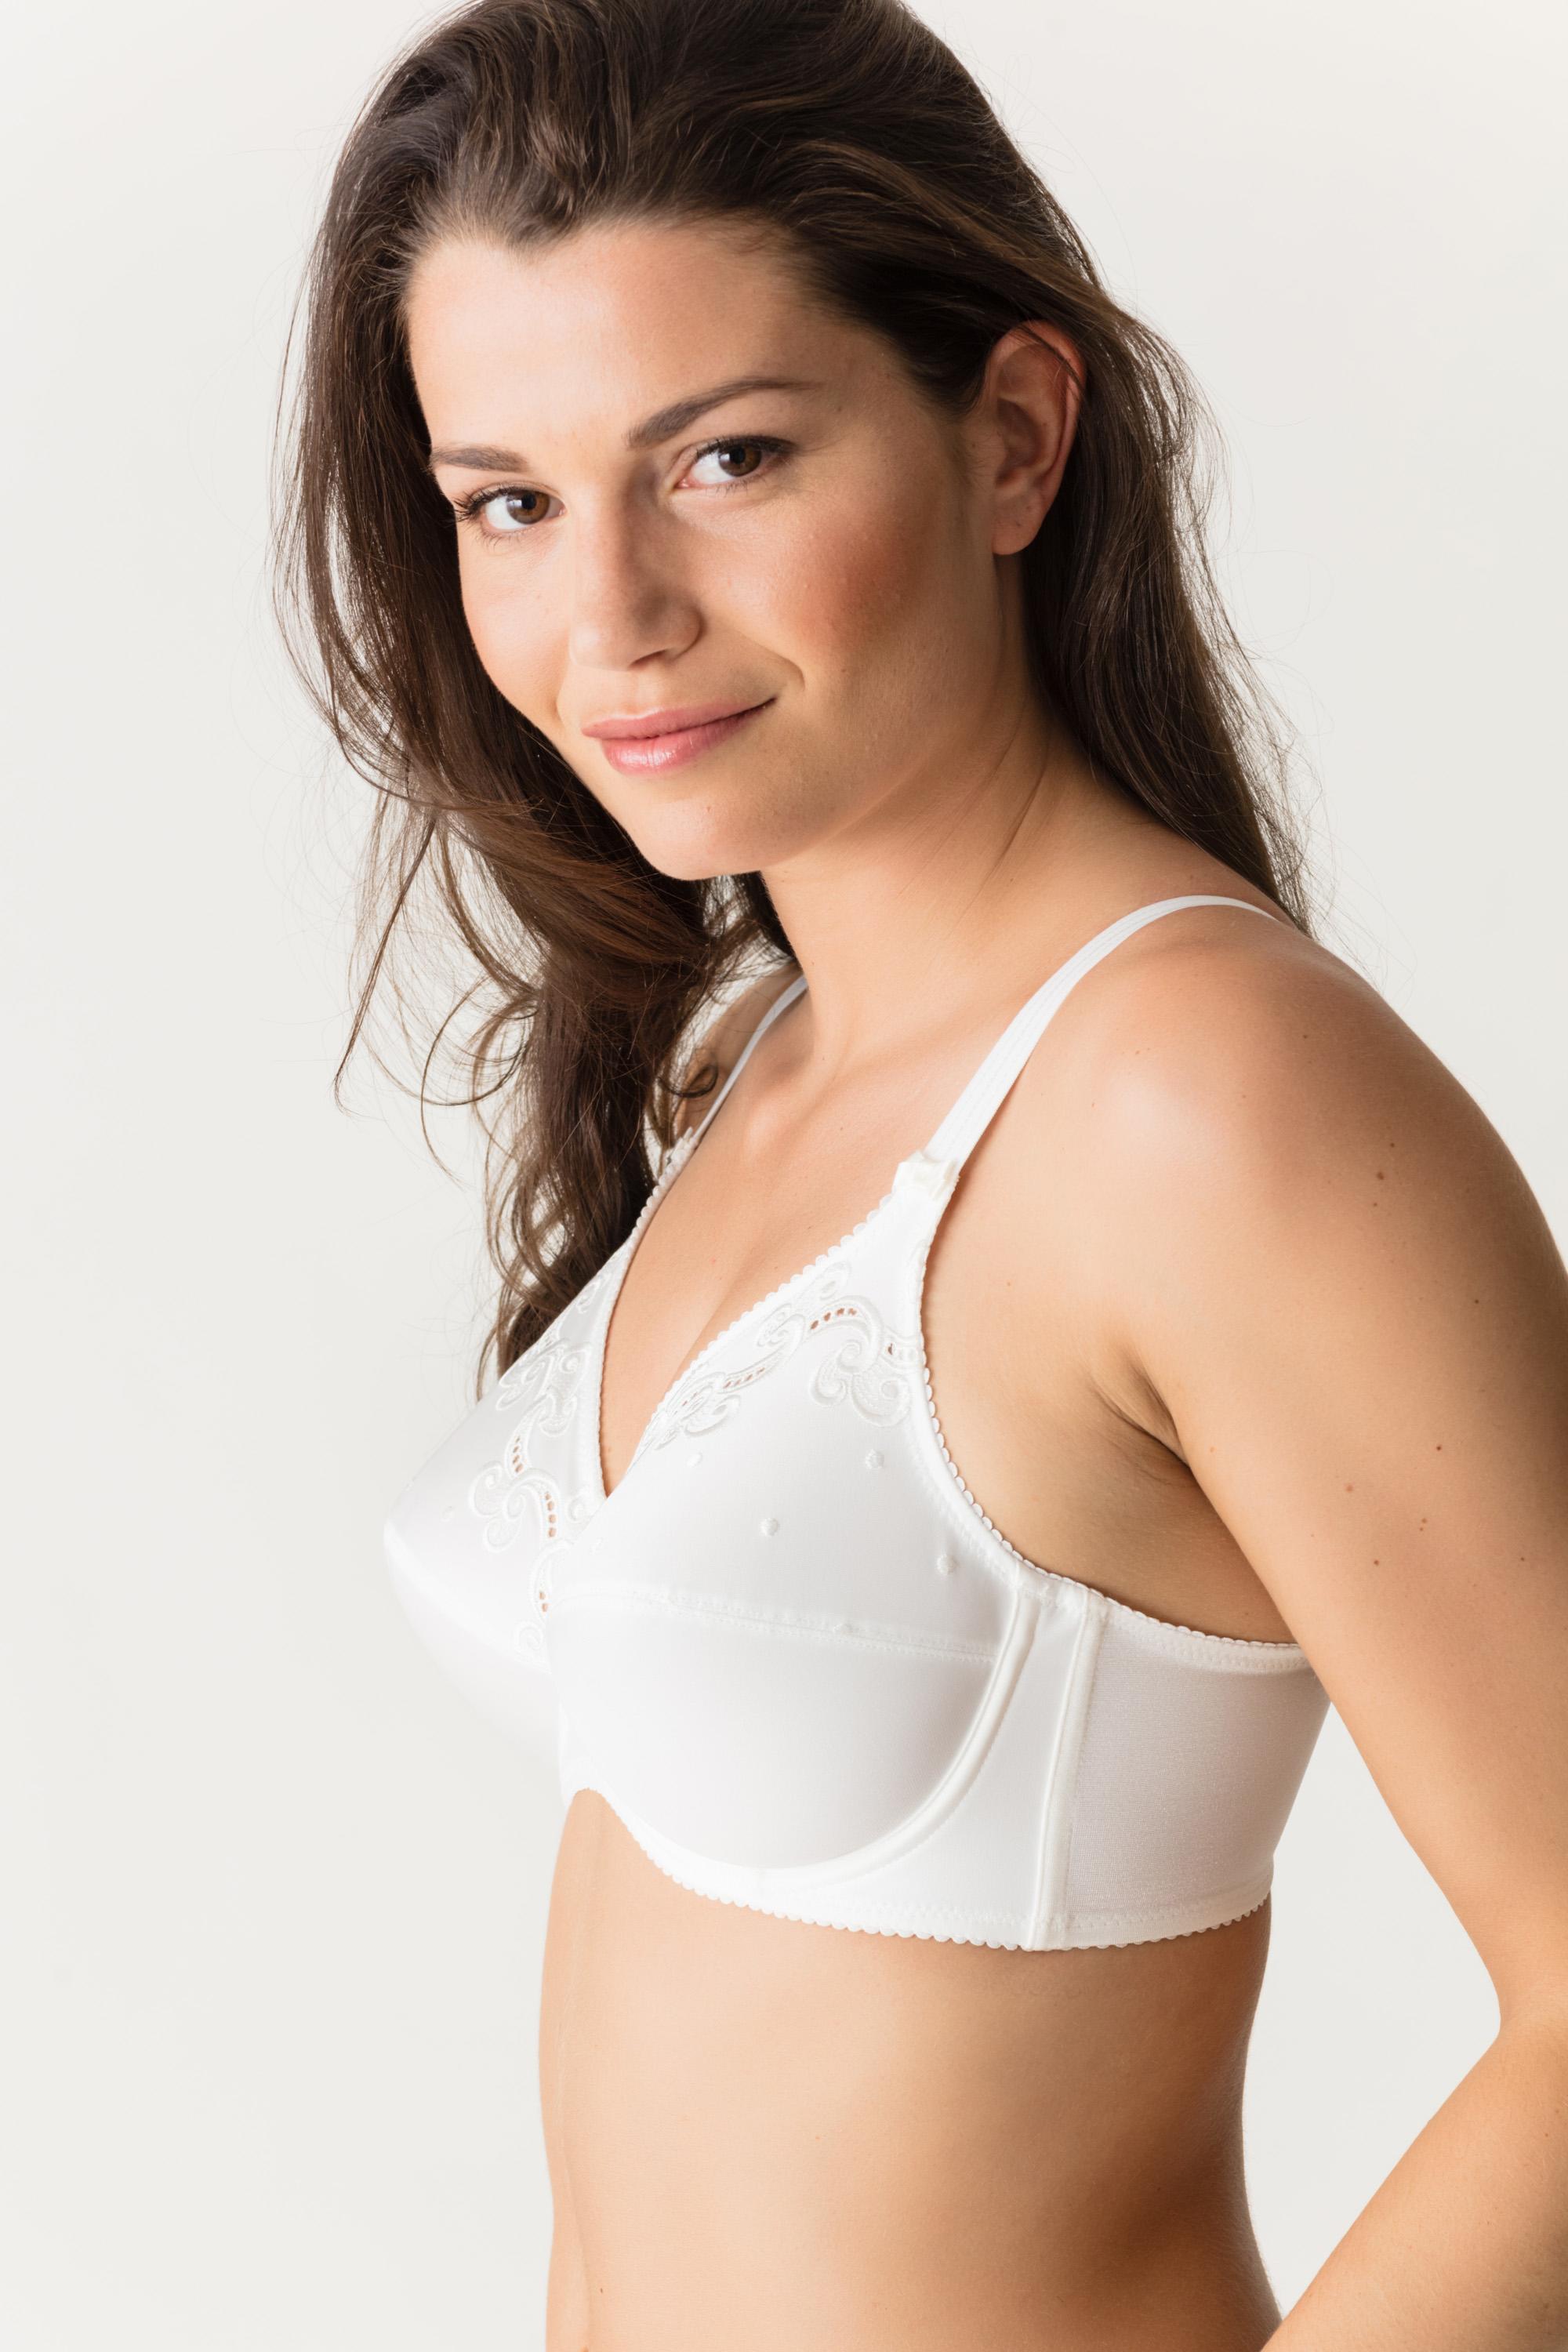 thus making this high cupped bra with supportive fabric suitable for matern...